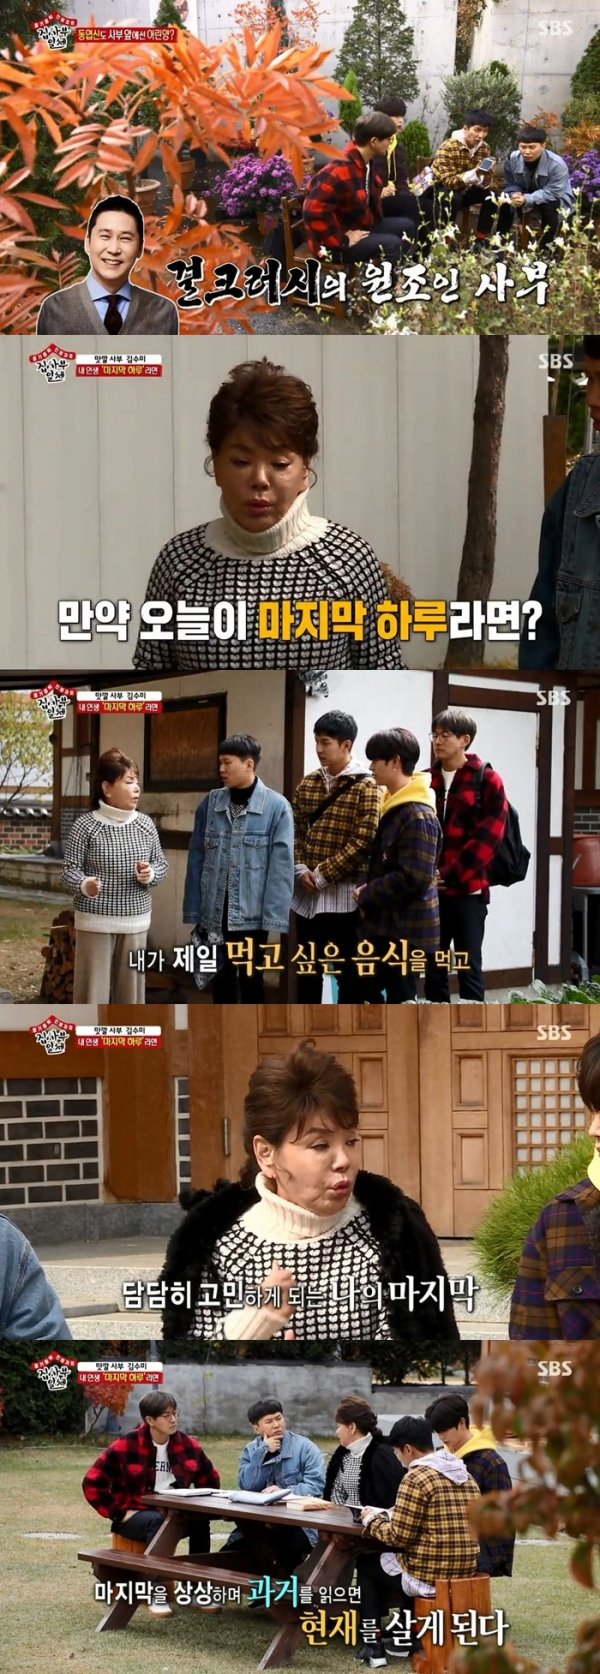 Lee Seung-gi, Lee Sang-yoon, Yook Sungjae, and Yang Se-hyeong had time to unveil their life shot before going to meet the 21st new master on SBS All The Butlers broadcast on the 18th (Sun).The members explained their life shot from Yang Se-hyeong, Lee Sang-yoon of Santiago, My boyfriend during the debut of Yook Sungjae, and Lee Seung-gi, who was recently taken at the shooting site in Morocco.The production team raised questions about the master by revealing why he asked for a life shot, saying, The master who met today asked me to take a picture that goes beyond the life shot you brought.Then, a hint fairy connected the phone call with the comedian Shin Dong-yup, who said of the master, It is the aid of Girl Crush.He is a man who talks 39 gold over 19 gold, he said. He is good at swearing and likes flowers. He and Sang-yoon may cry.The members noticed the identity of the master to some extent and moved on.According to the advice of Shin Dong-yup, the members who prepared the bouquet faced Kim Soo-mi, the master of the day who is making rice while listening to the classic in front of the cauldron on the back of the hanok.Kim Soo-mi, who overpowered the members with charisma from the beginning, revealed why he invited the members of All The Butlers to the Hanok house.O-nu-ri last Haru wanted to sleep in a hanok. The master said, As is born, death is not my will. I am already 70 years old.I see the future. Think of it as the last of your days.I want to eat the food I want to eat the most if I am the last Haru of O-nu-ri and give all the answers to the questions you are curious about. The members who had a meaningful story about life and death in five minutes after meeting fell into deep thought, pondering the question of the master, How to live the last Haru of O-nu-ri life and the suggestion to send the last Haru of the imaginary life.Kim Soo-mi also went to dinner with members of the delicious sesame leaf kimchi, par kimchi, and mucheong kimchi prepared by himself, saying, If the last Haru of life is steamed sweet potato, I will eat kimchi.Kim Soo-mi shared his memories of his father, who said, I think of my father, he said, I sold my sweet potato field and sent me to a middle school in Seoul.When Lee Seung-gi asked, What will you do after eating rice? Kim Soo-mi said, You take a picture of the spirit.I want to take a picture of a portrait that can not be seen anywhere. Kim Soo-mi said, I am not a general portrait, but I will take it beautifully.Its cool, he said.Kim Soo-mi asked the members to take a picture of Youngjeong, which is nowhere in the world after moving to a beautiful park with maple leaves.Kim Soo-mi emphasized, I will use my photo today as my portrait photo, so I can laugh while I am mourning with Feelings.Kim Soo-mi also painted his future funeral, saying, When the bonus goes out, the song is also heard, but I want you to dance and send it.Are you really writing (in portraits)? I got a big mission, Yook Sungjae told Kim Soo-mi, because its real.I do not like the death of my age, but I want to accept it. I was a unique actor, so I want to be consistent until the end.Please give up the idea that it is a photo of Youngjeong. Lee Seung-gi was luxury, Lee Sang-yoon was elegant, Yang Se-hyeong was blue, and Yook Sungjae was sexy. The members took their own concept and started taking Kim Soo-mi portrait.Kim Soo-mi was a heavenly actor; Kim Soo-mi, who prepared perfectly for costumes and props, took photography in various ways, from indifferentness and delight to delightful charm.Kim Soo-mi laughed when Lee Sang-yoon saw a picture of himself and expressed I think Im going to hell.Furthermore, he added, I want to live a little more. He also conveyed another sincerity to viewers about the meaning of death. On the other hand, the members challenged the life shot on this day.Lee Seung-gi emphasized good, Lee Sang-yoon Ju Yunbal, Yang Se-hyeong hip Feelings and Yook Sungjae mystery.On the other hand, Living with the Living Life Tutor - All The Butlers is broadcast every Sunday at 6:25 pm.